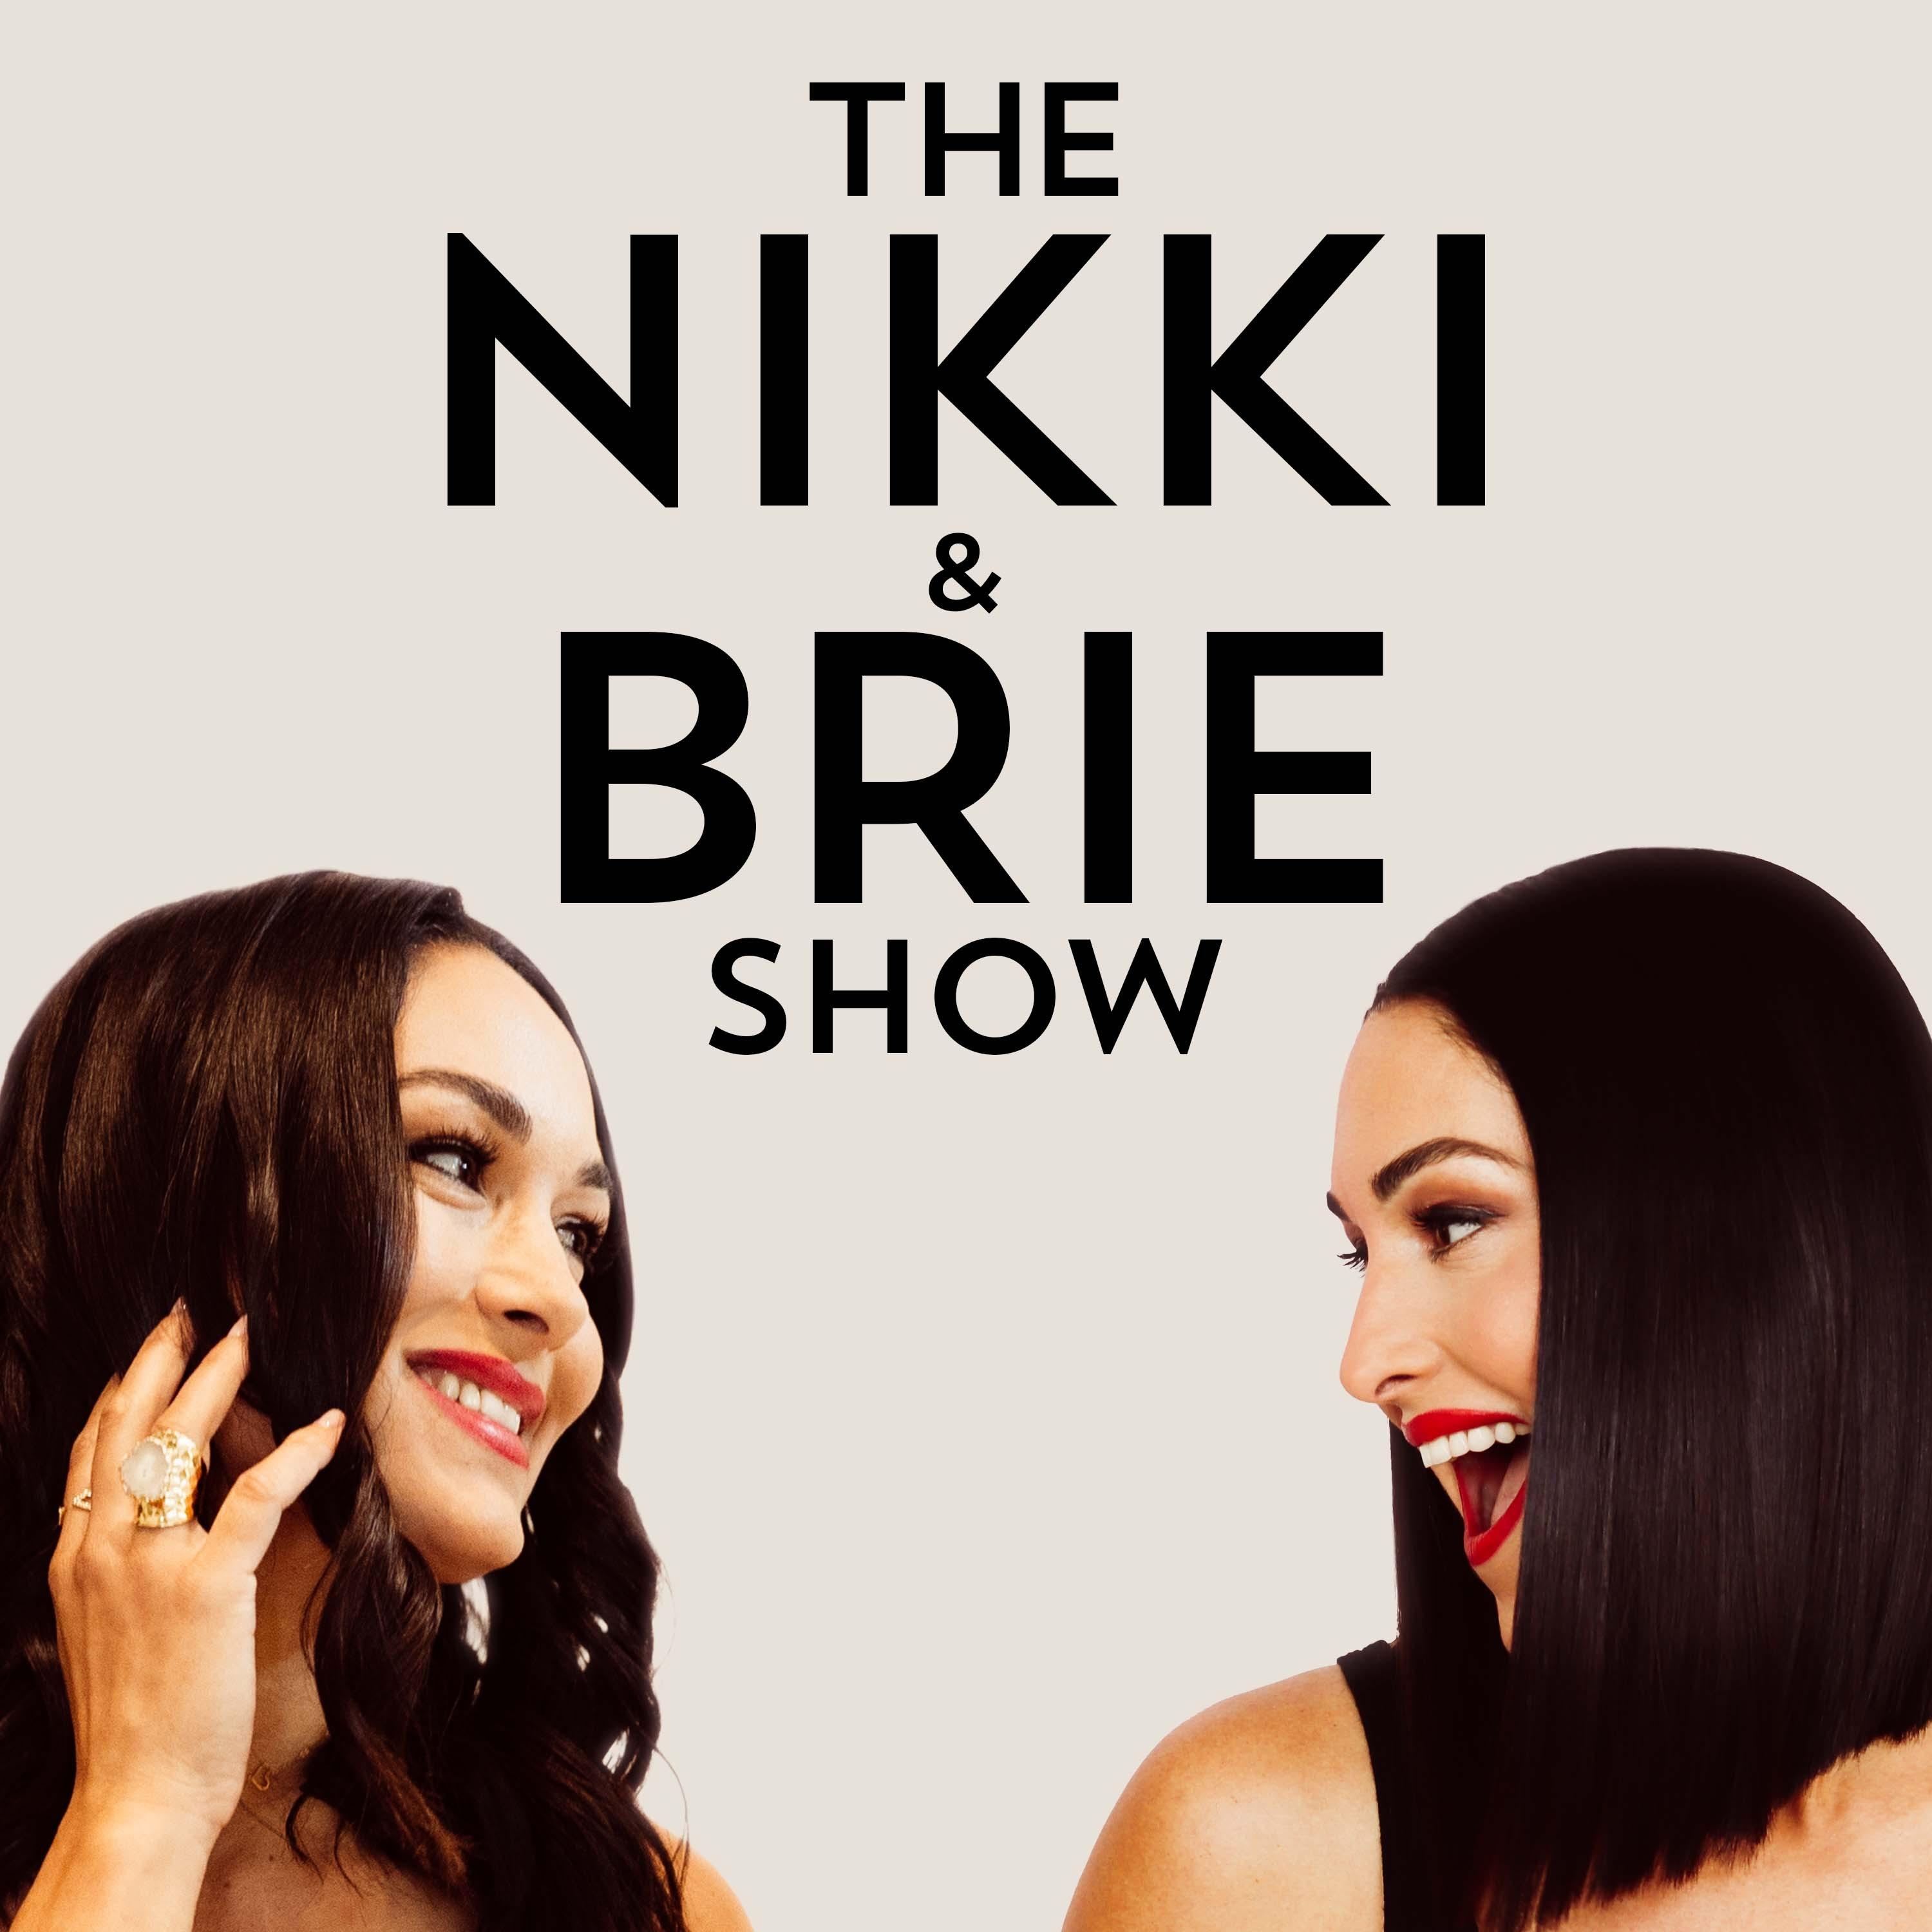 Show poster of The Nikki & Brie Show